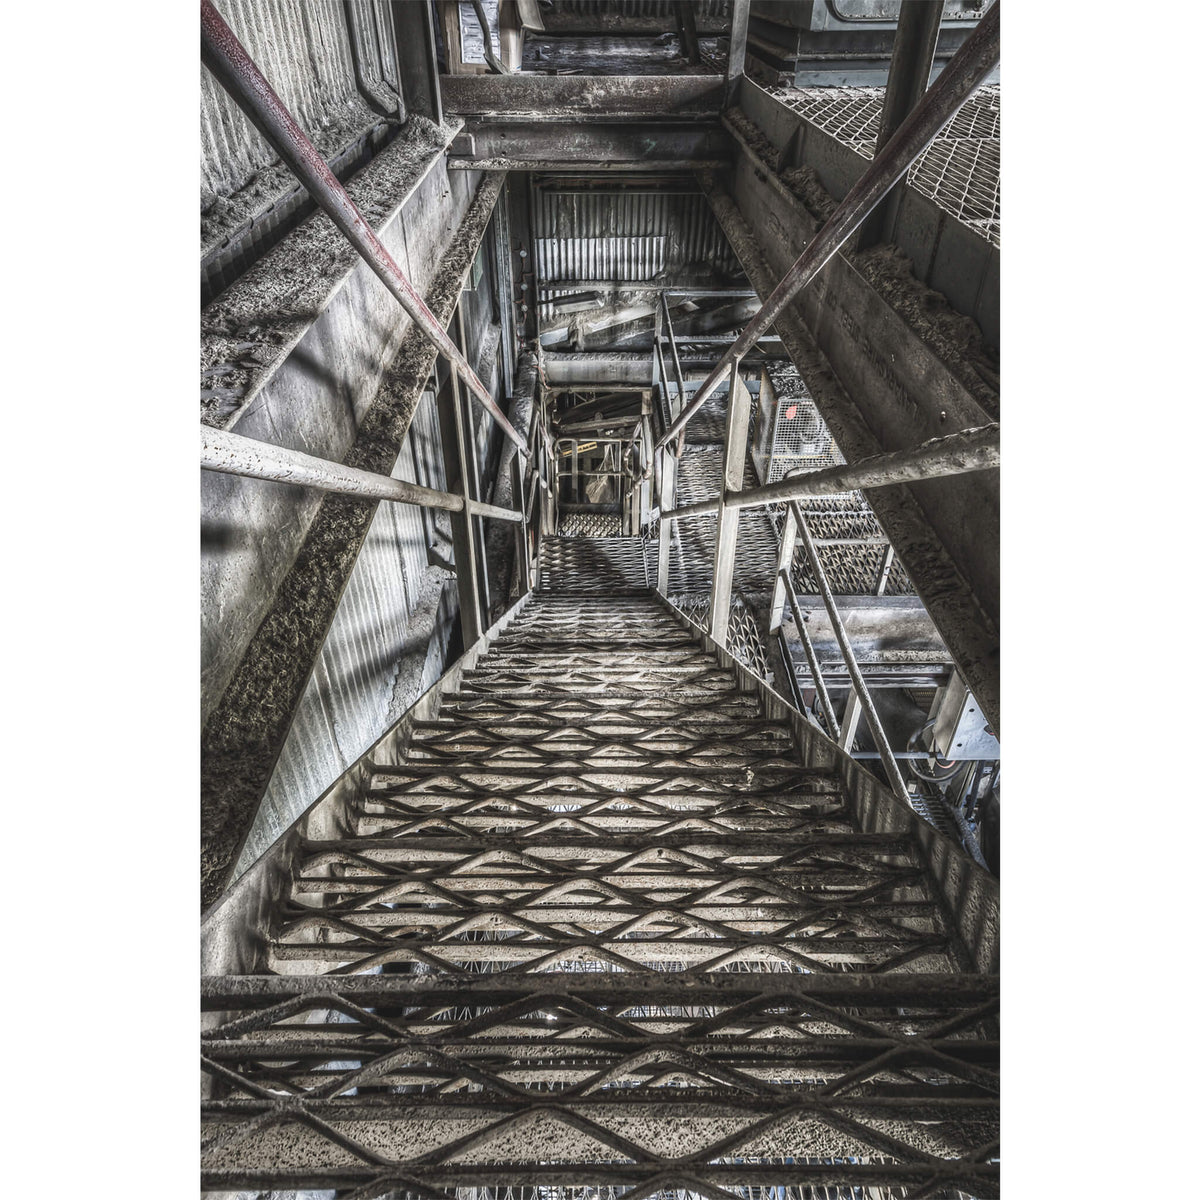 Stairs | Kandos Cement Works